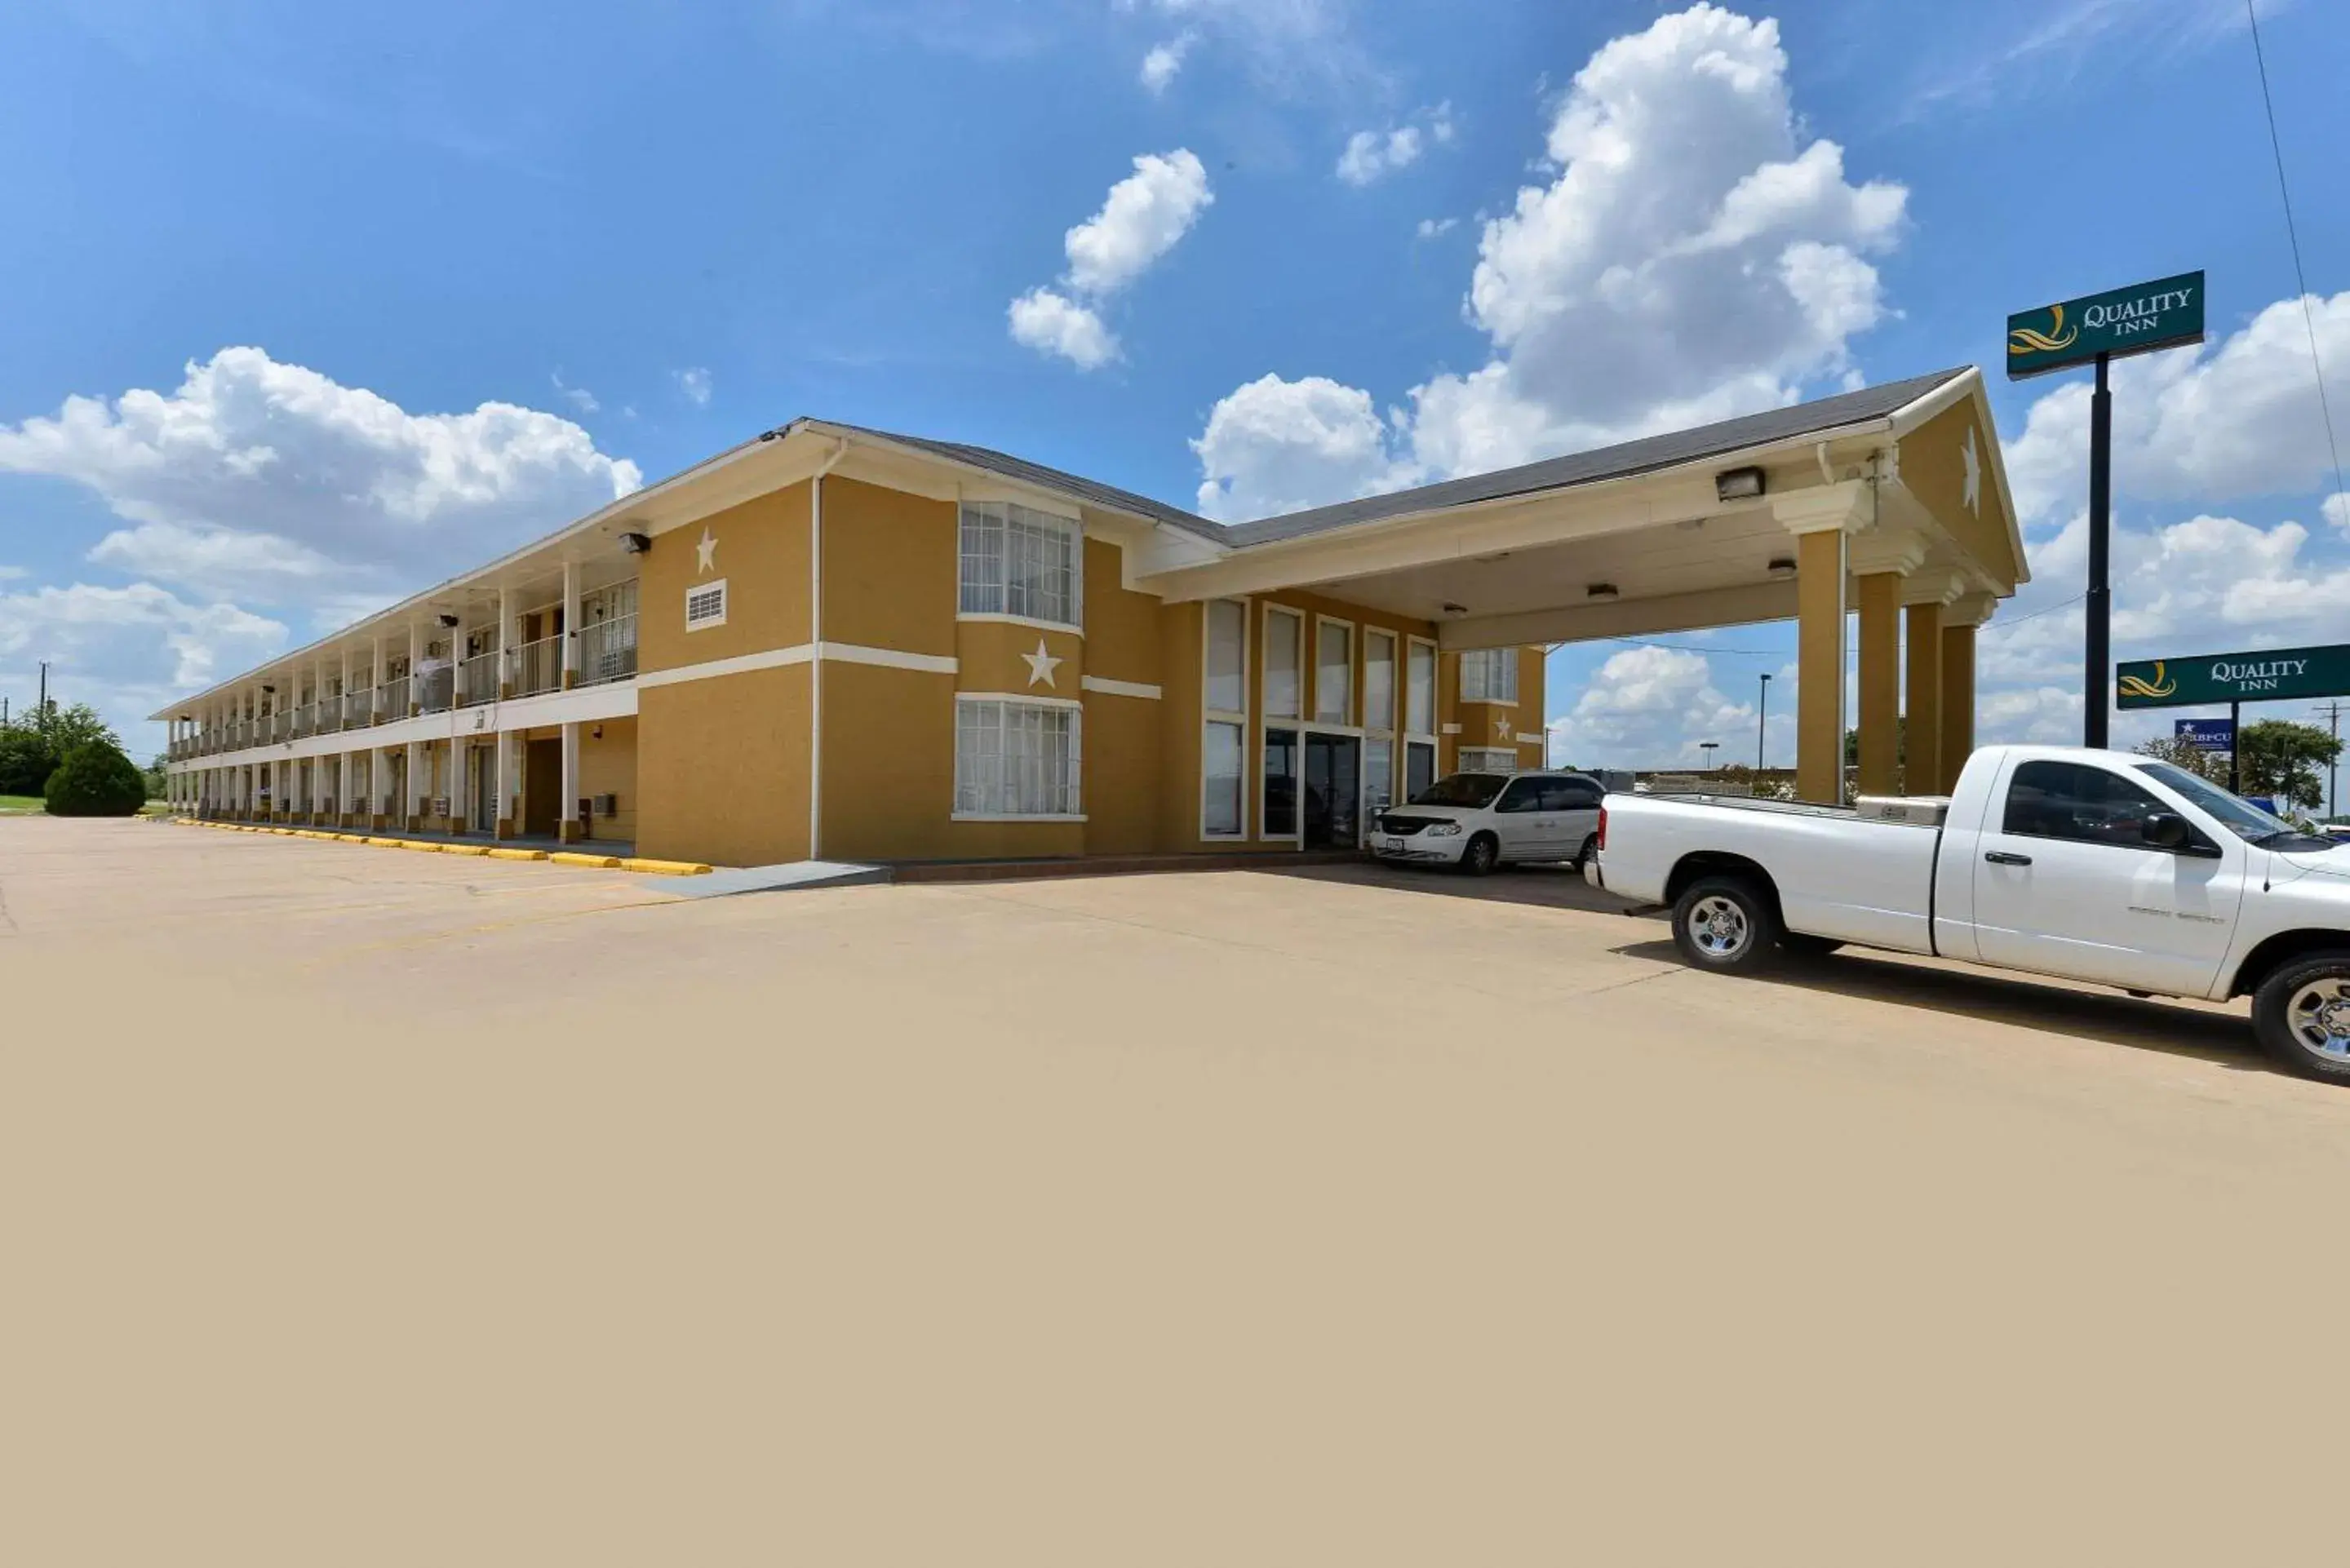 Property Building in Quality Inn Gonzales